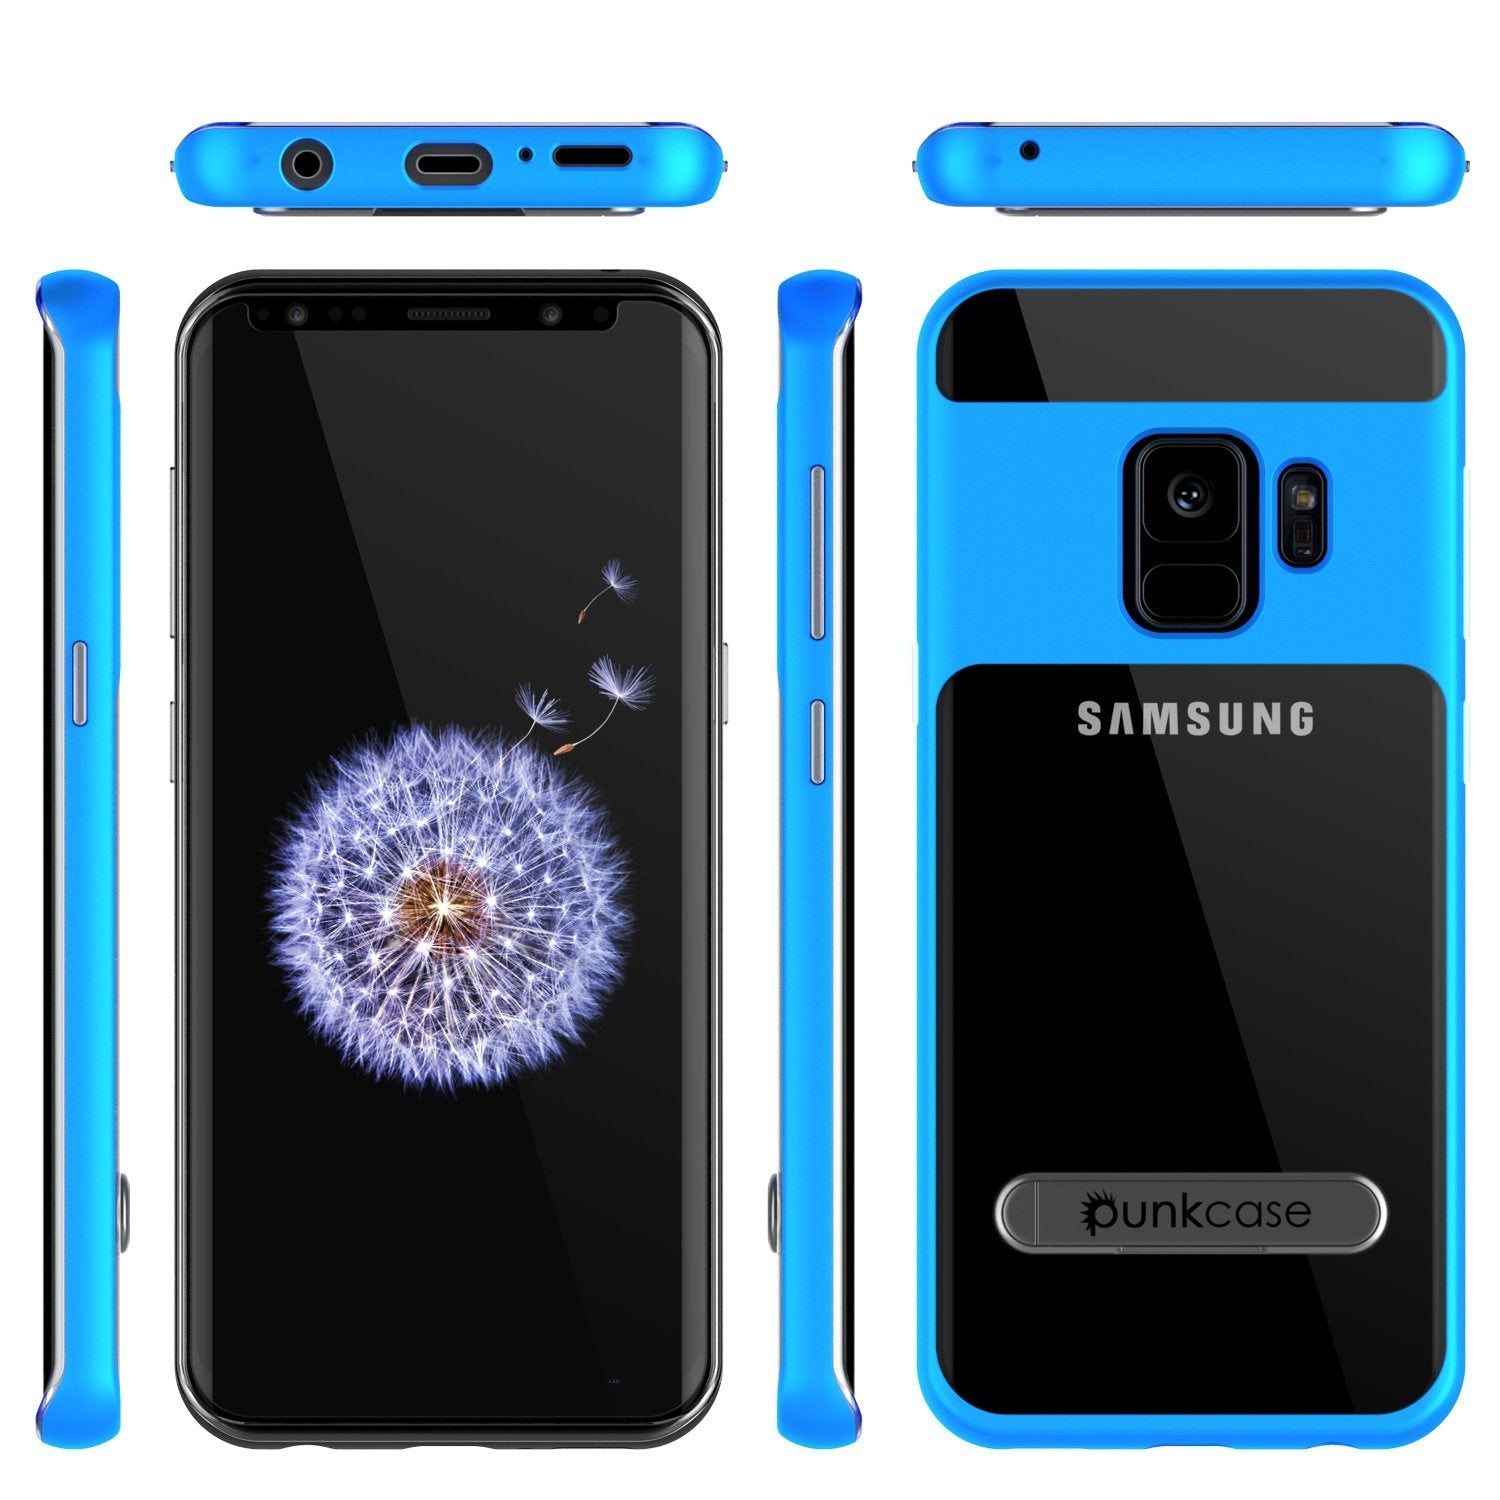 Galaxy S9 Case, PUNKcase [LUCID 3.0 Series] [Slim Fit] [Clear Back] Armor Cover w/ Integrated Kickstand, Anti-Shock System & PUNKSHIELD Screen Protector for Samsung Galaxy S9 [Blue] - PunkCase NZ